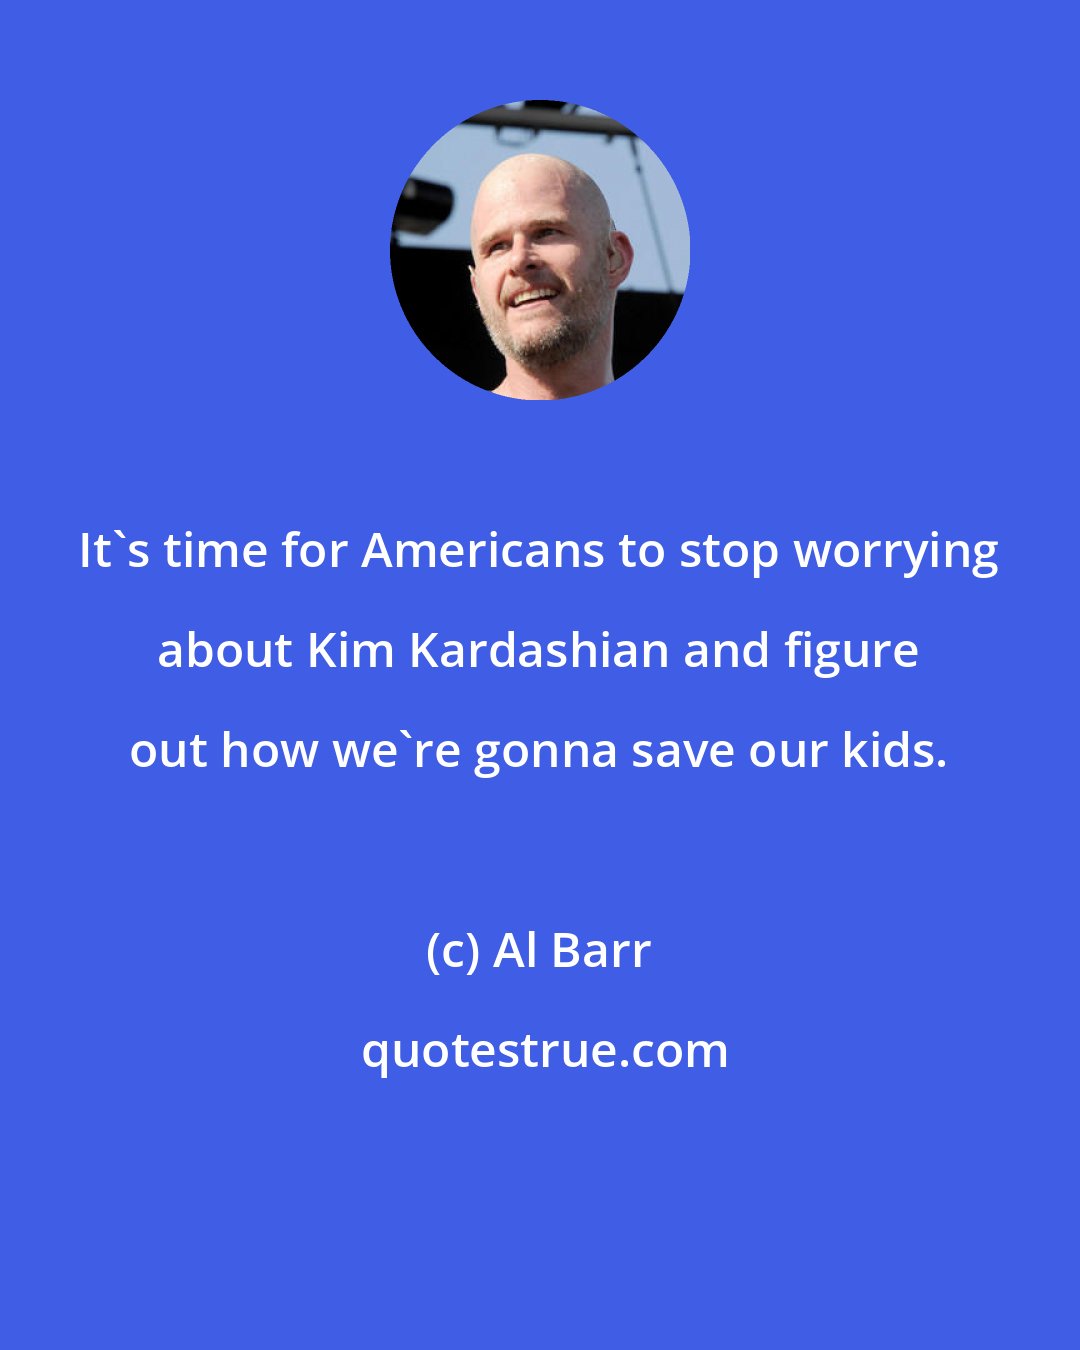 Al Barr: It's time for Americans to stop worrying about Kim Kardashian and figure out how we're gonna save our kids.